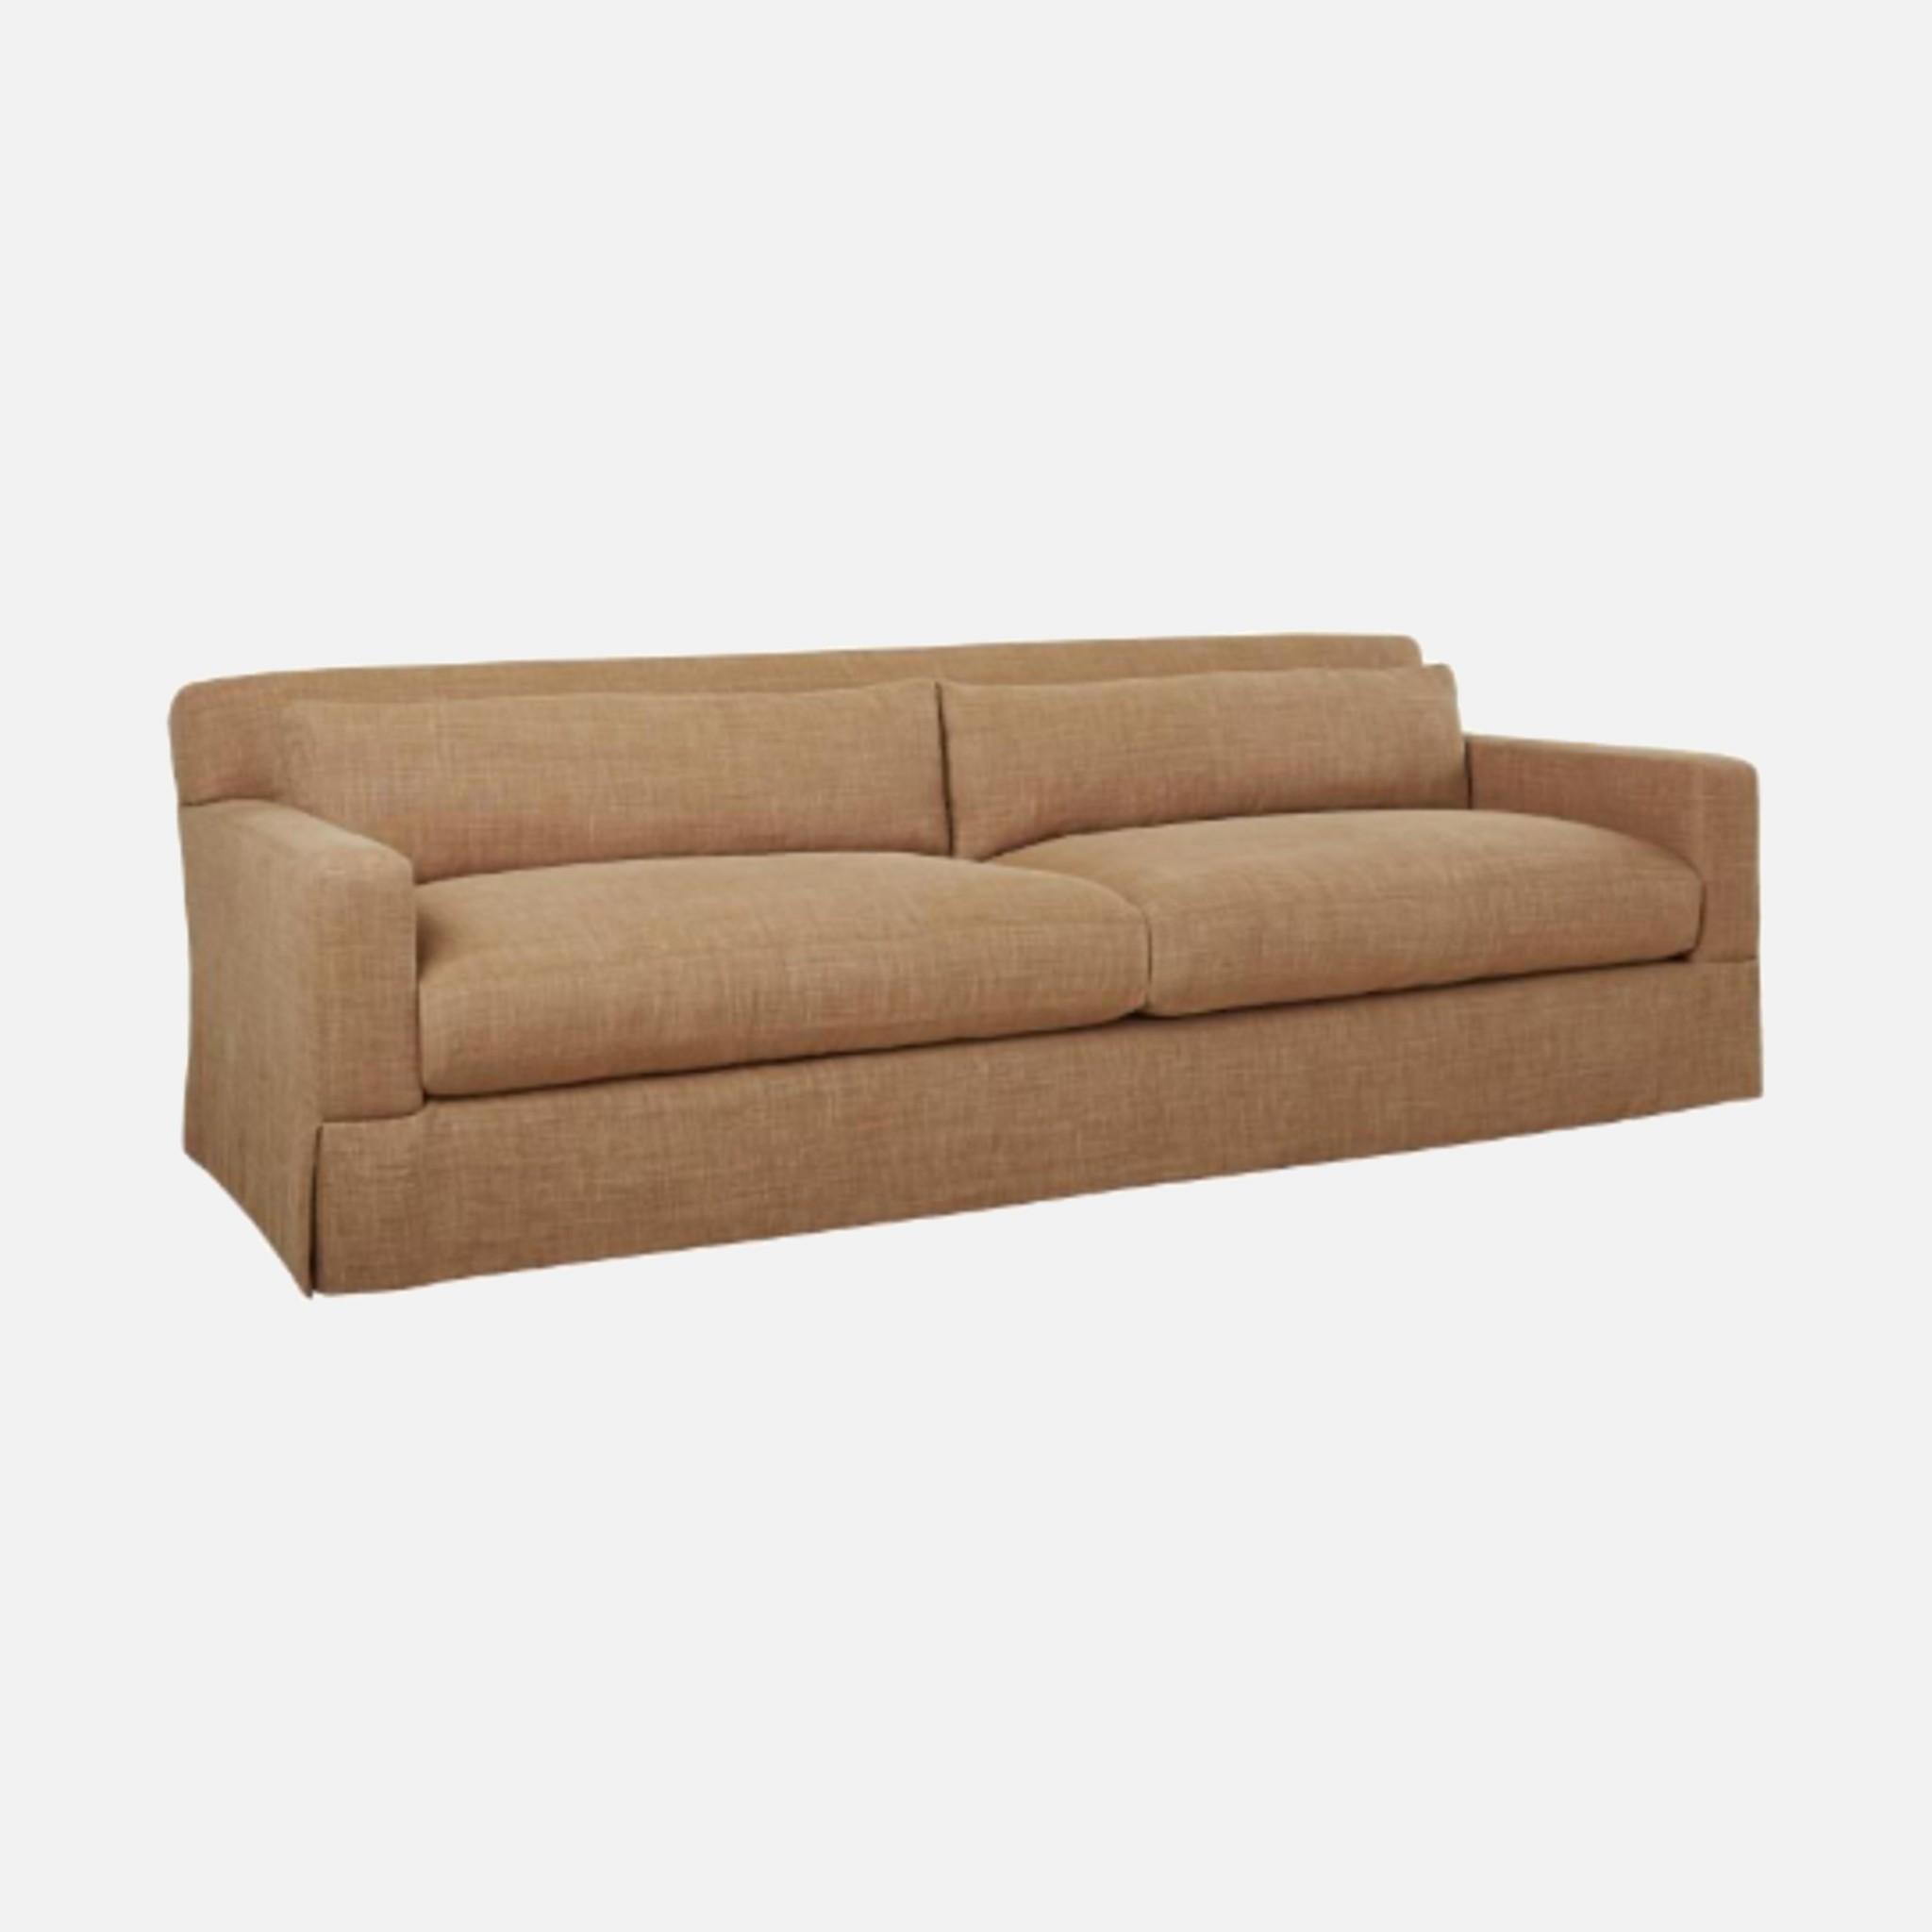 The image of an Lee Industries Extra Long Sofa product